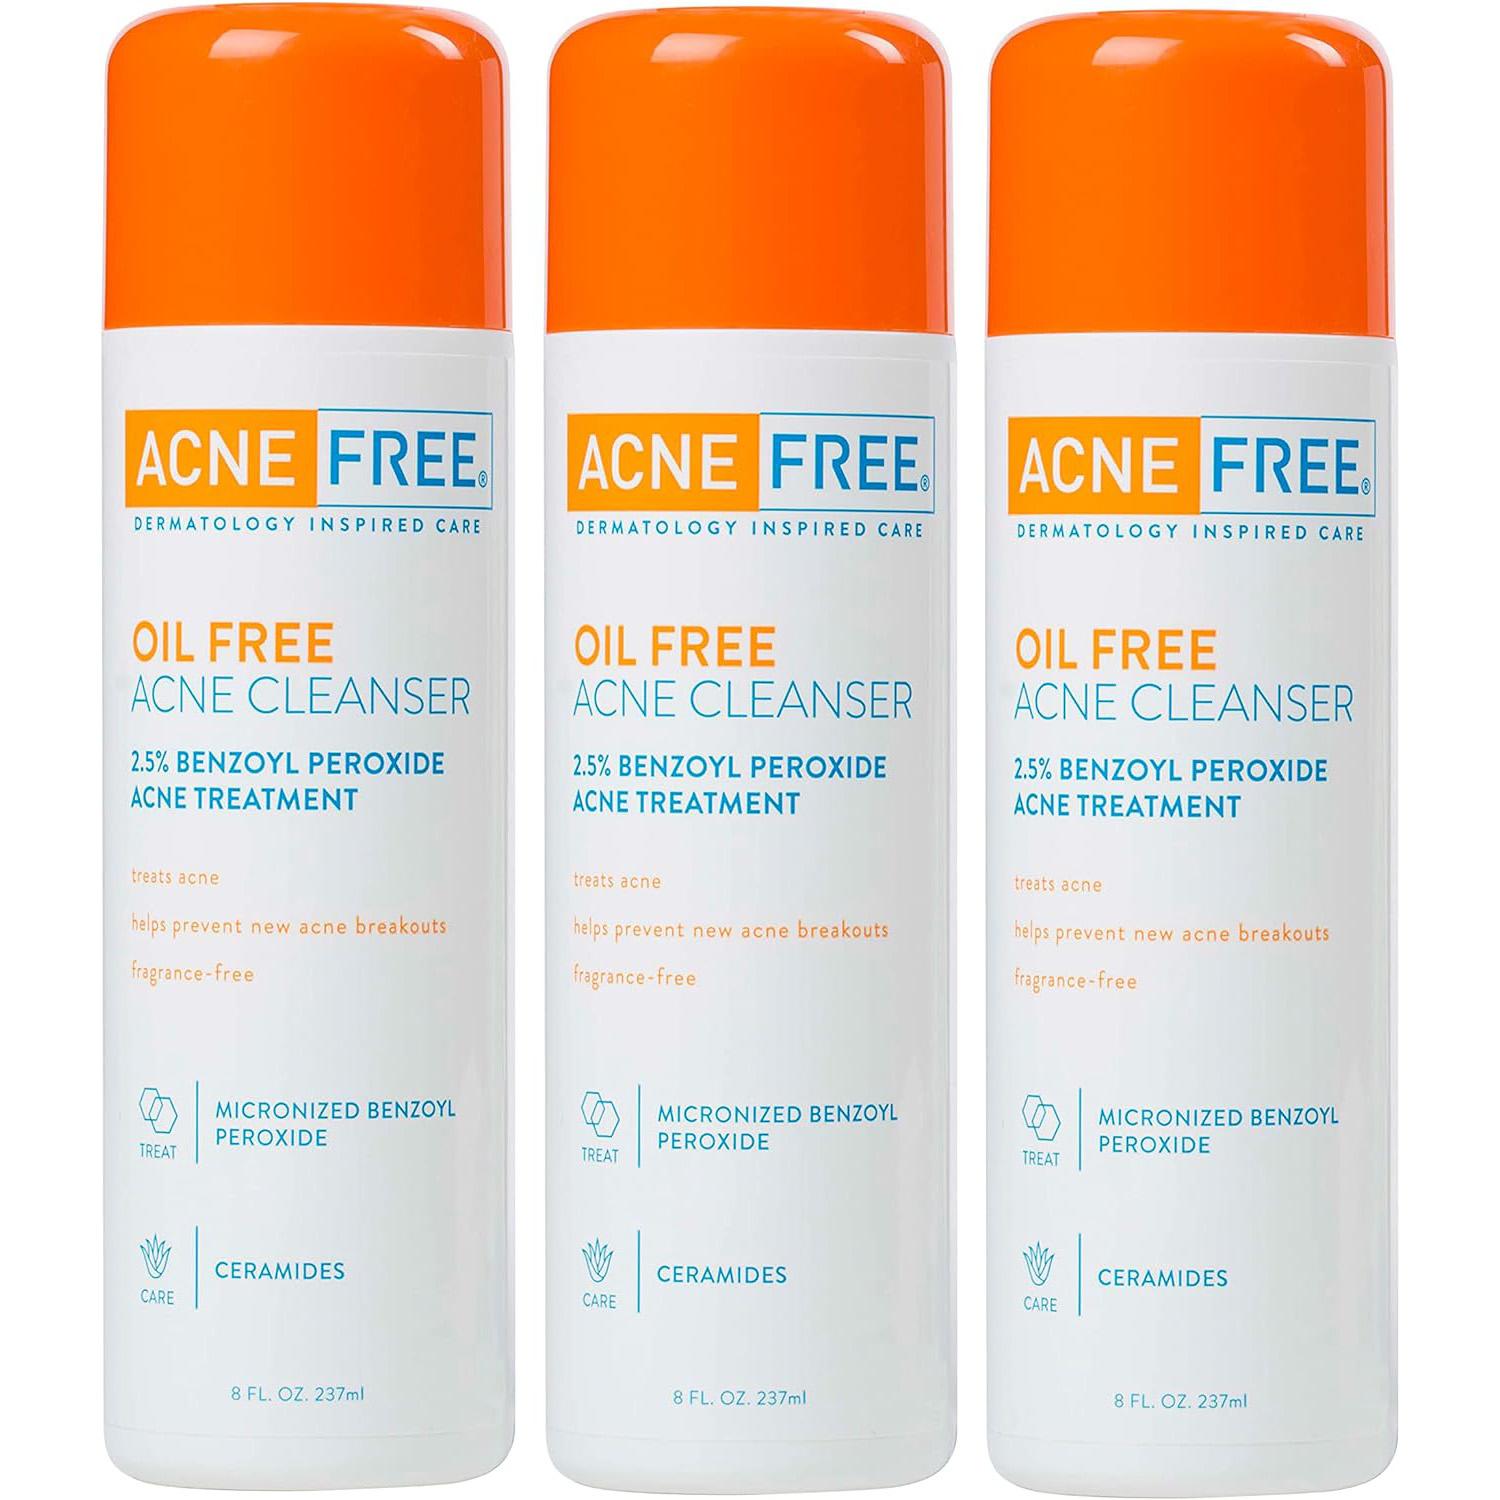 AcneFree Benzoyl Peroxide Acne Cleanser for $10.48 Shipped